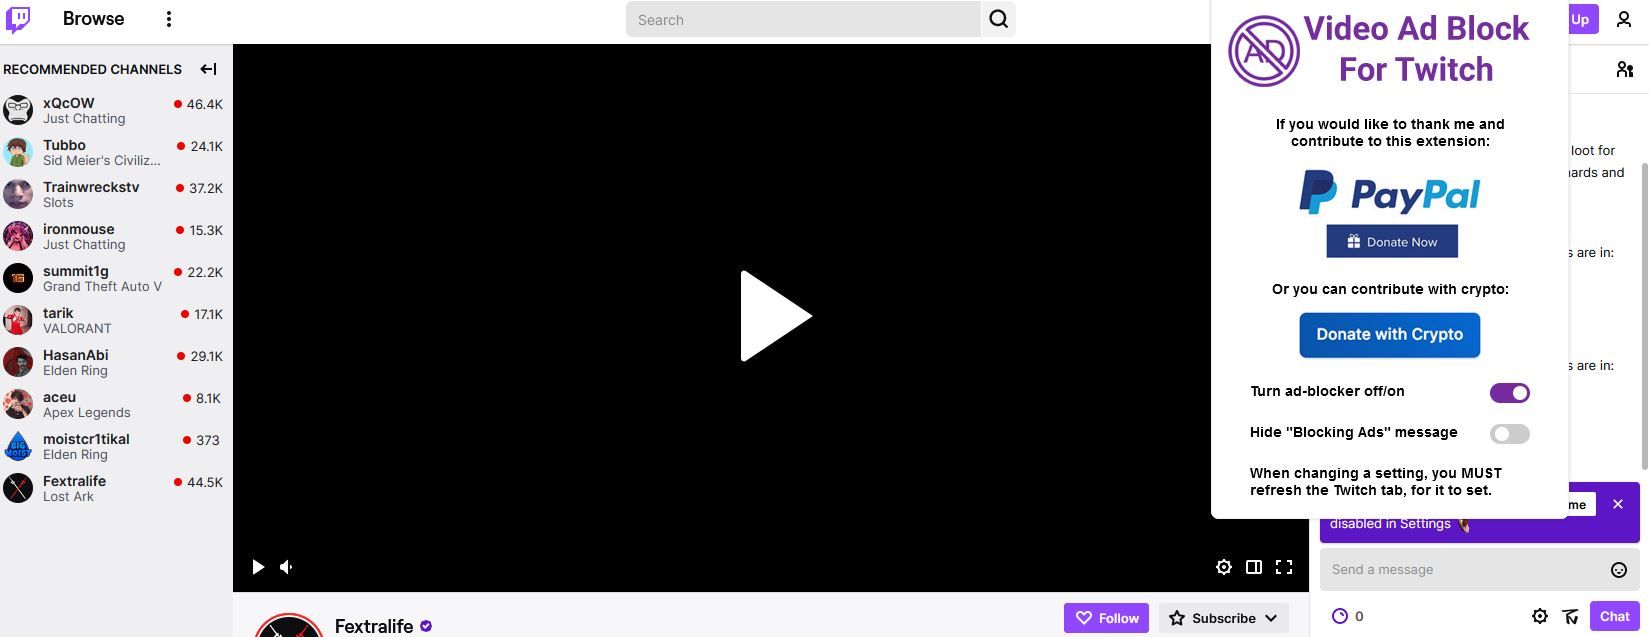 A Screenshot of the Video Ad-Block, for Twitch Firefox Extension in Use